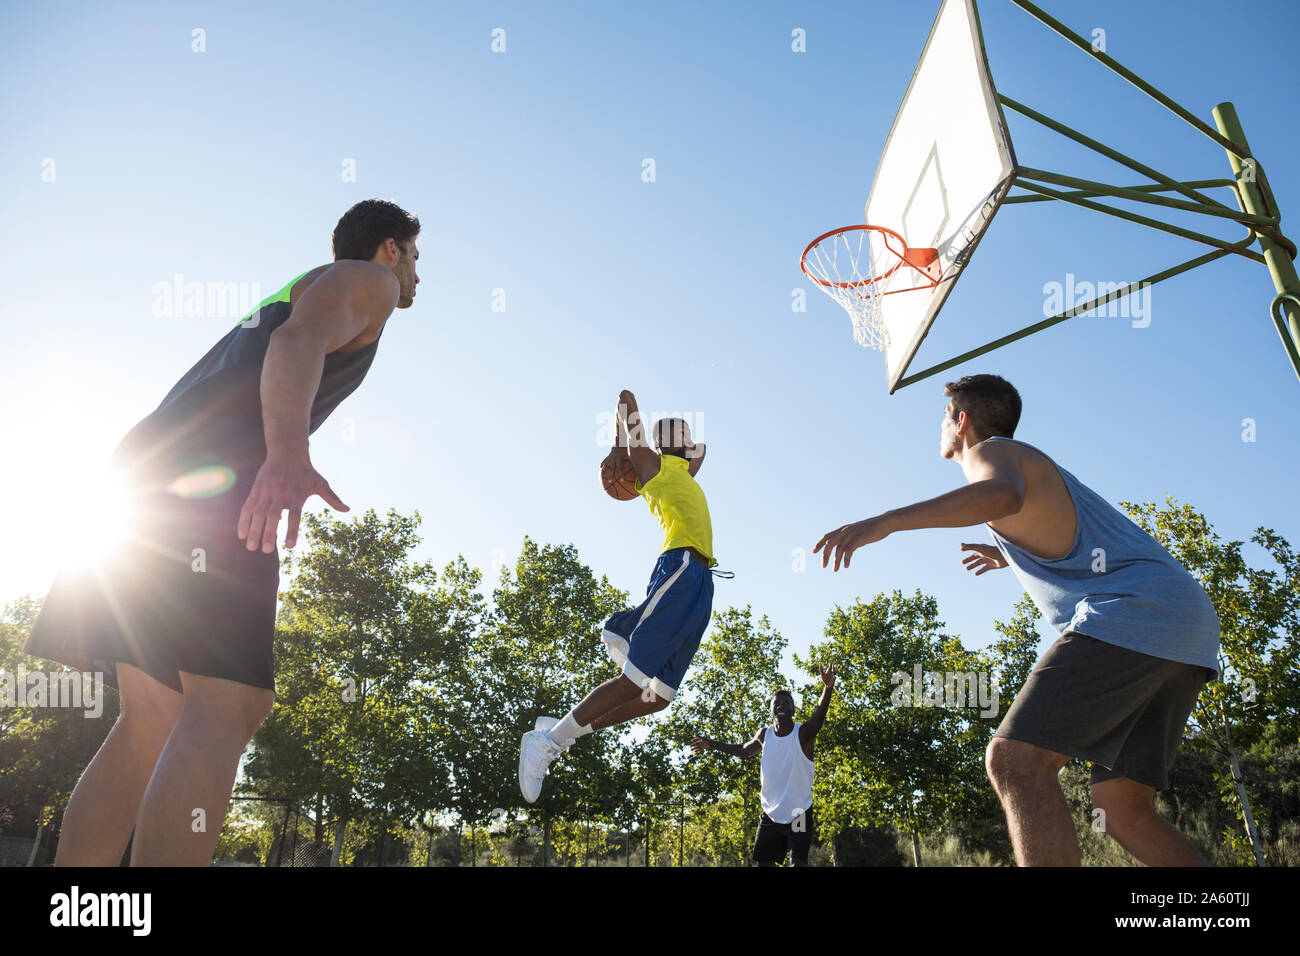 Group of people running and jumping while playing streetball Stock Photo